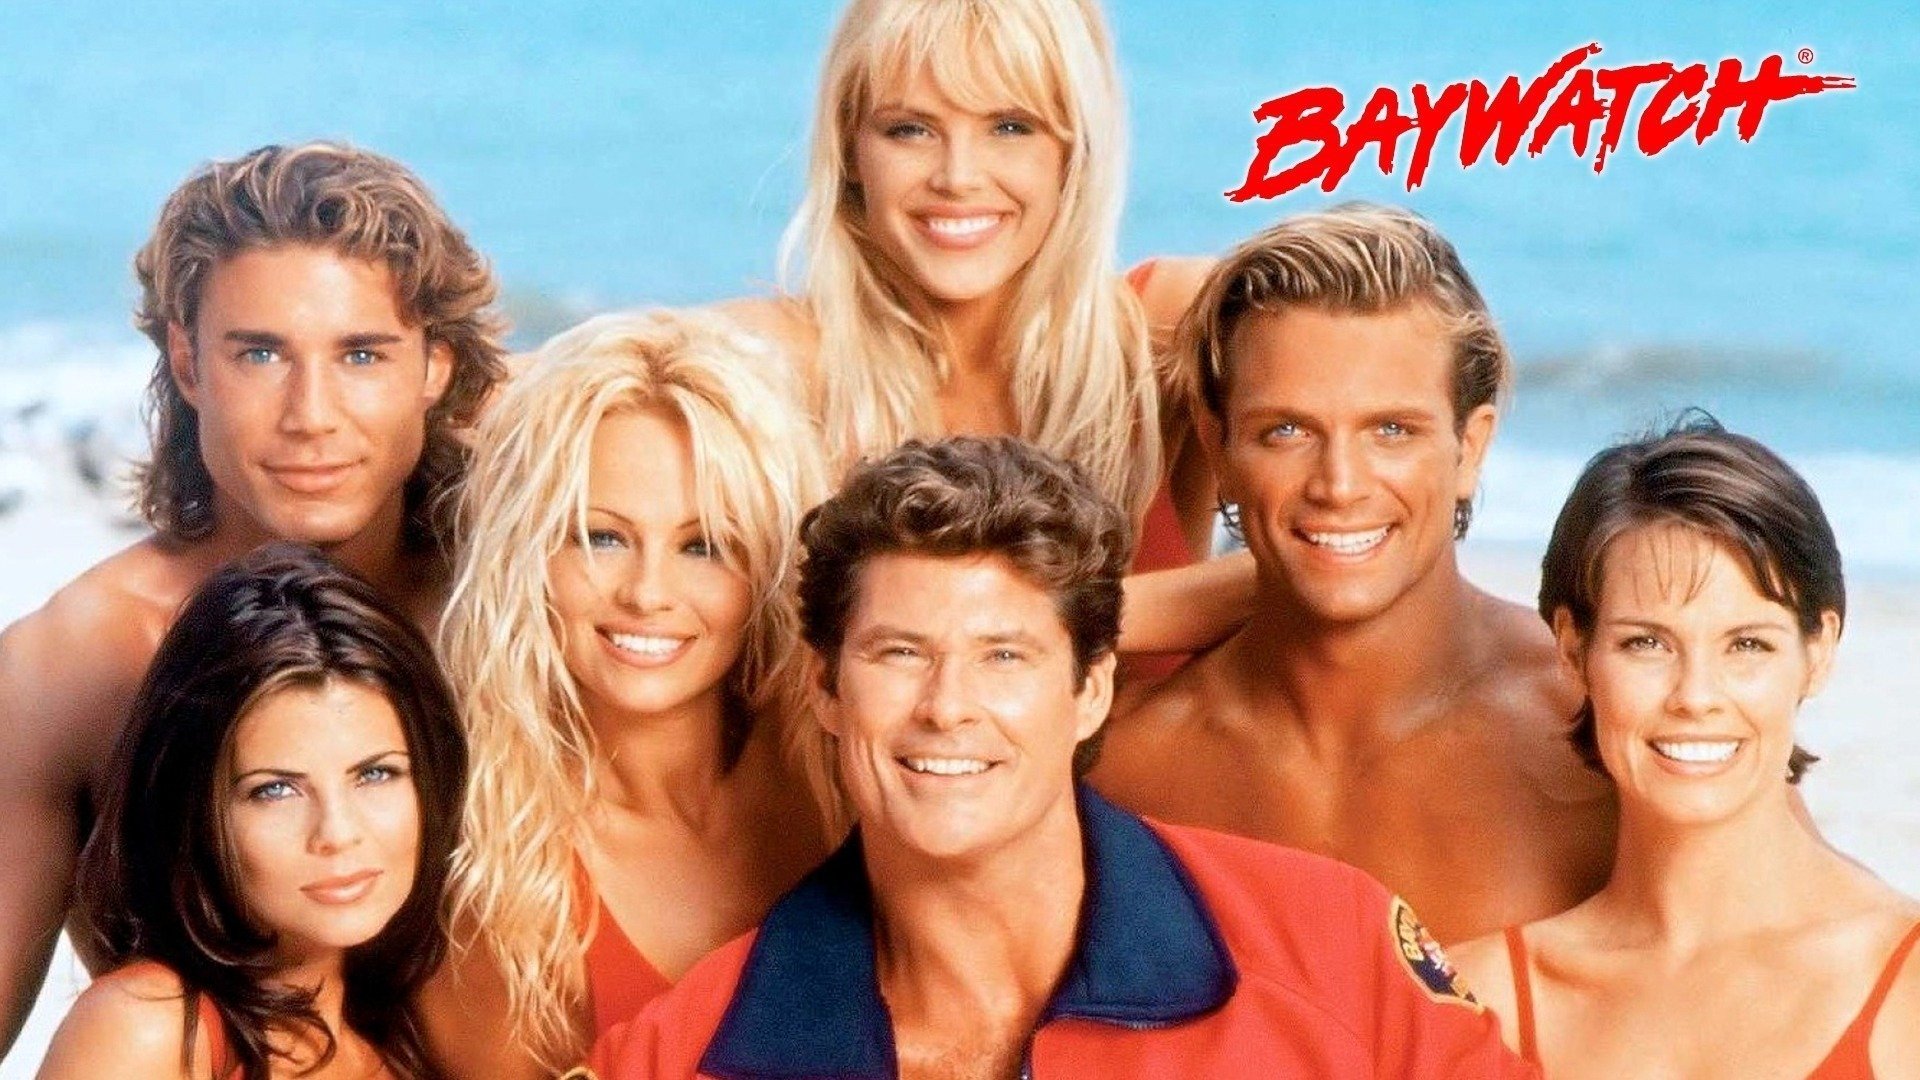 Watch LA Fire & Rescue The Real Baywatch S1 E3 | TV Shows | DIRECTV